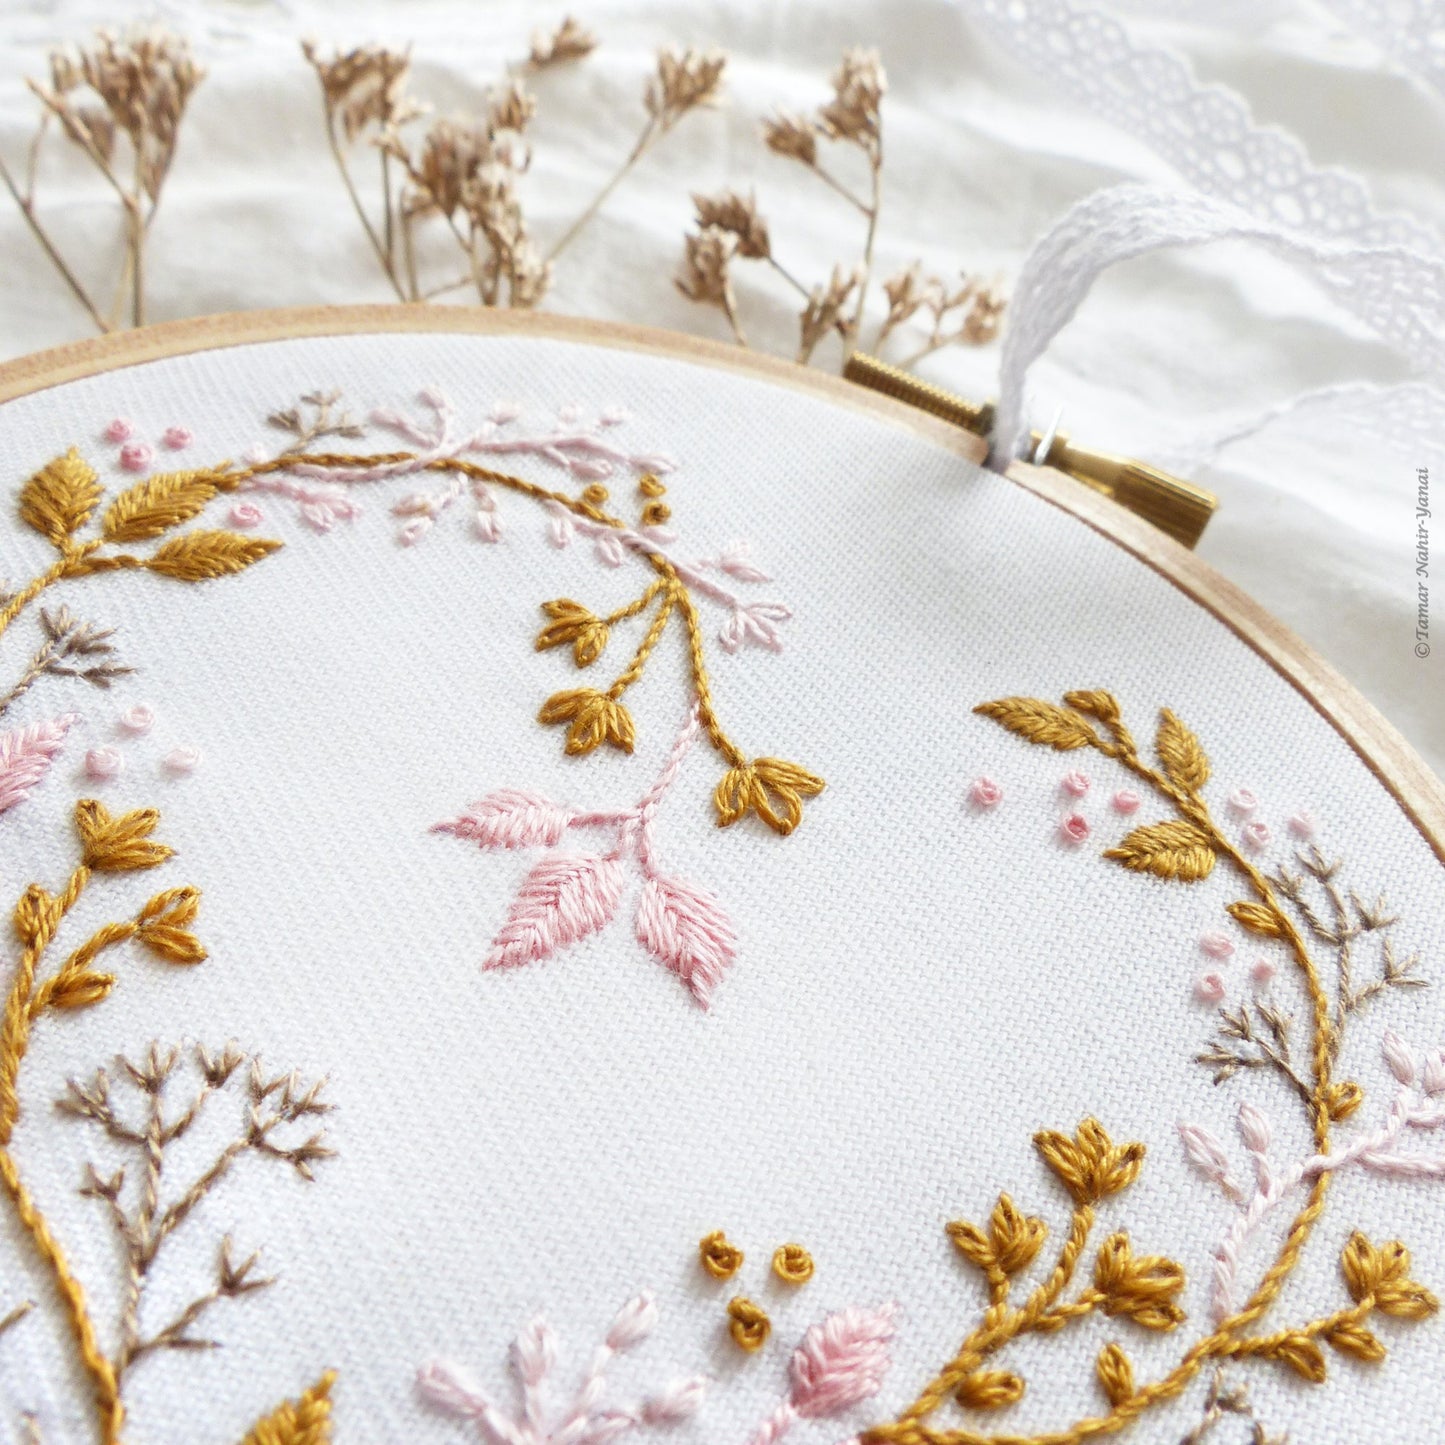 Wildflower Heart embroidery kit